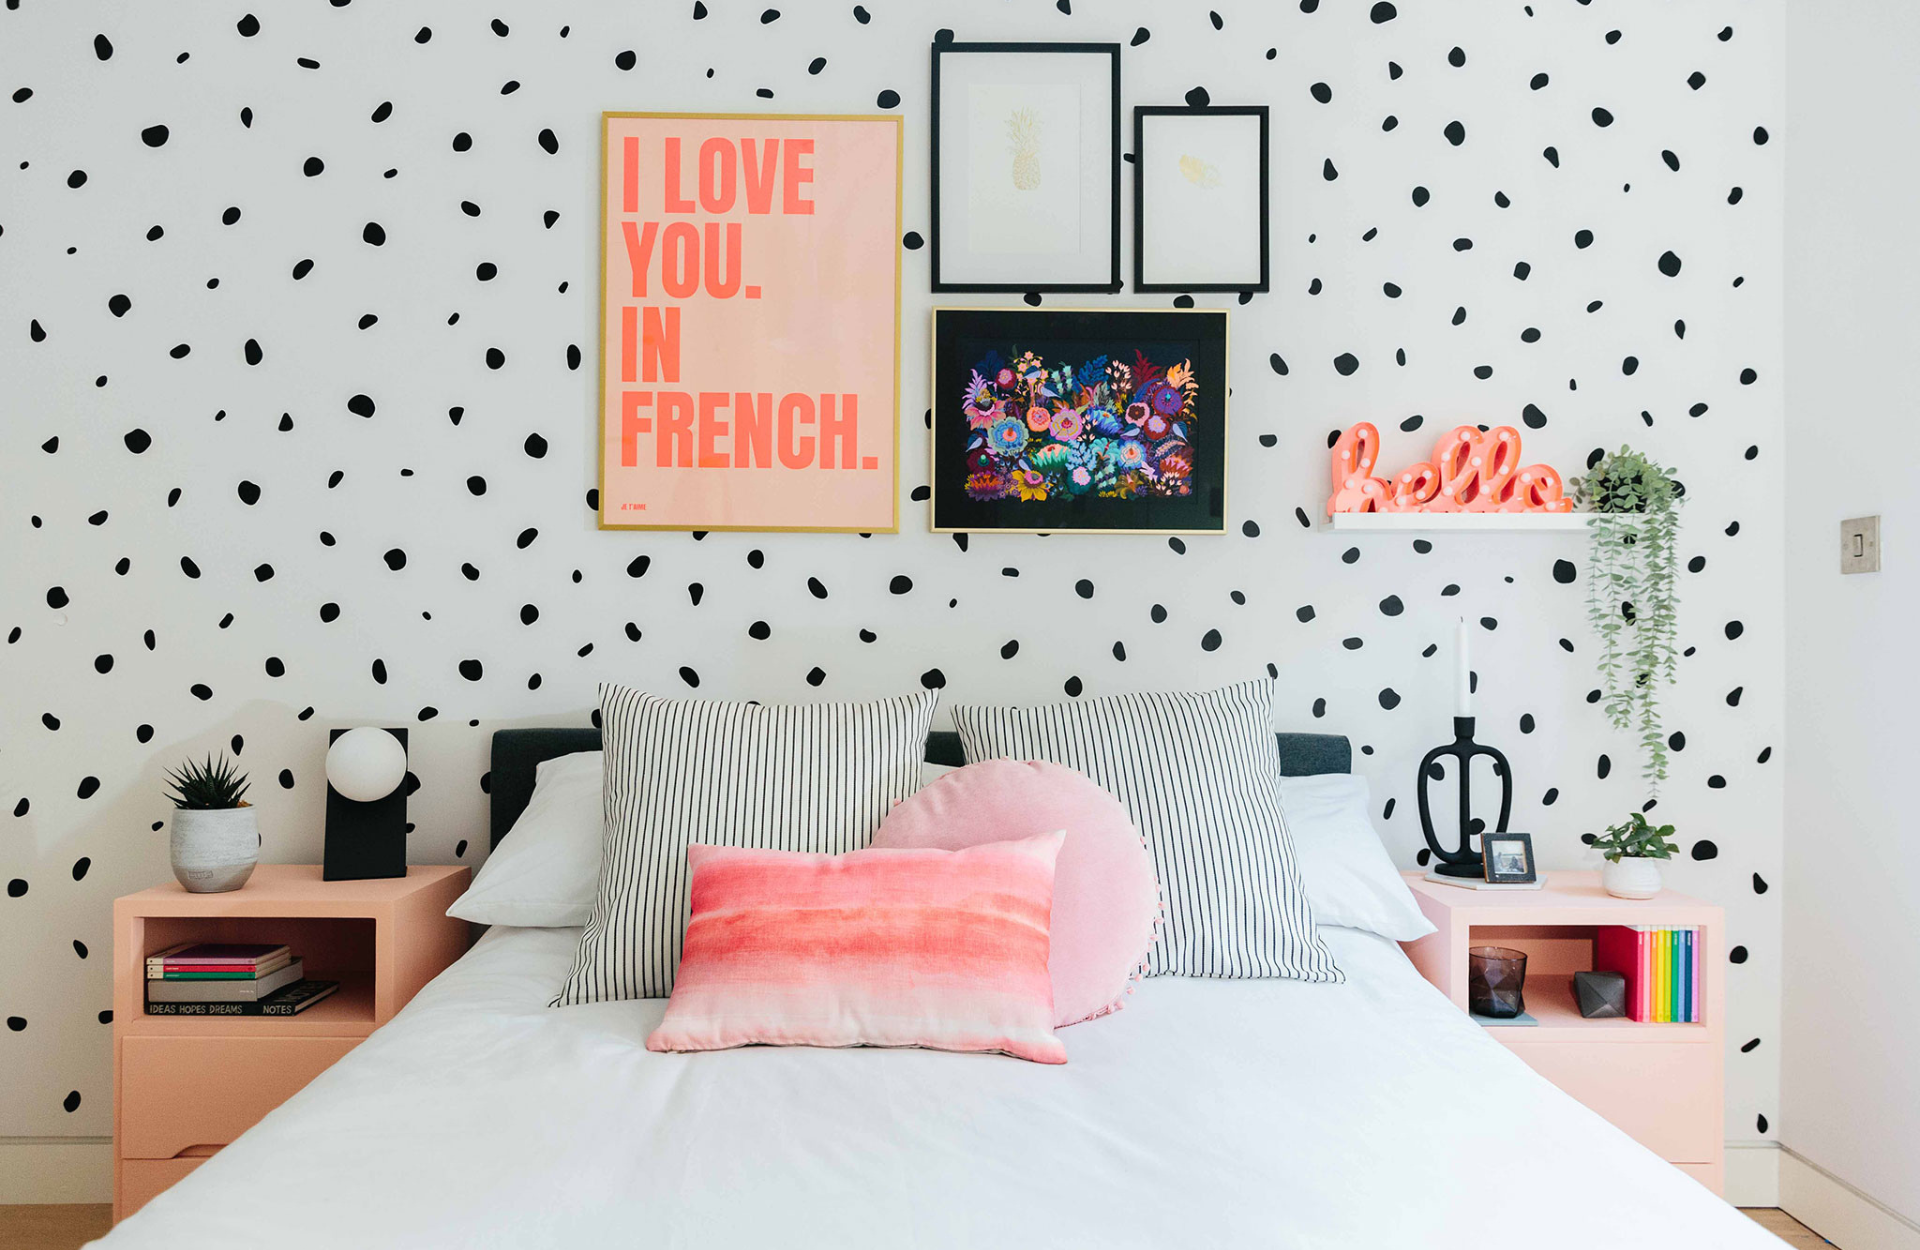 17 Creative Wall Paint Ideas for Every Room in Your House